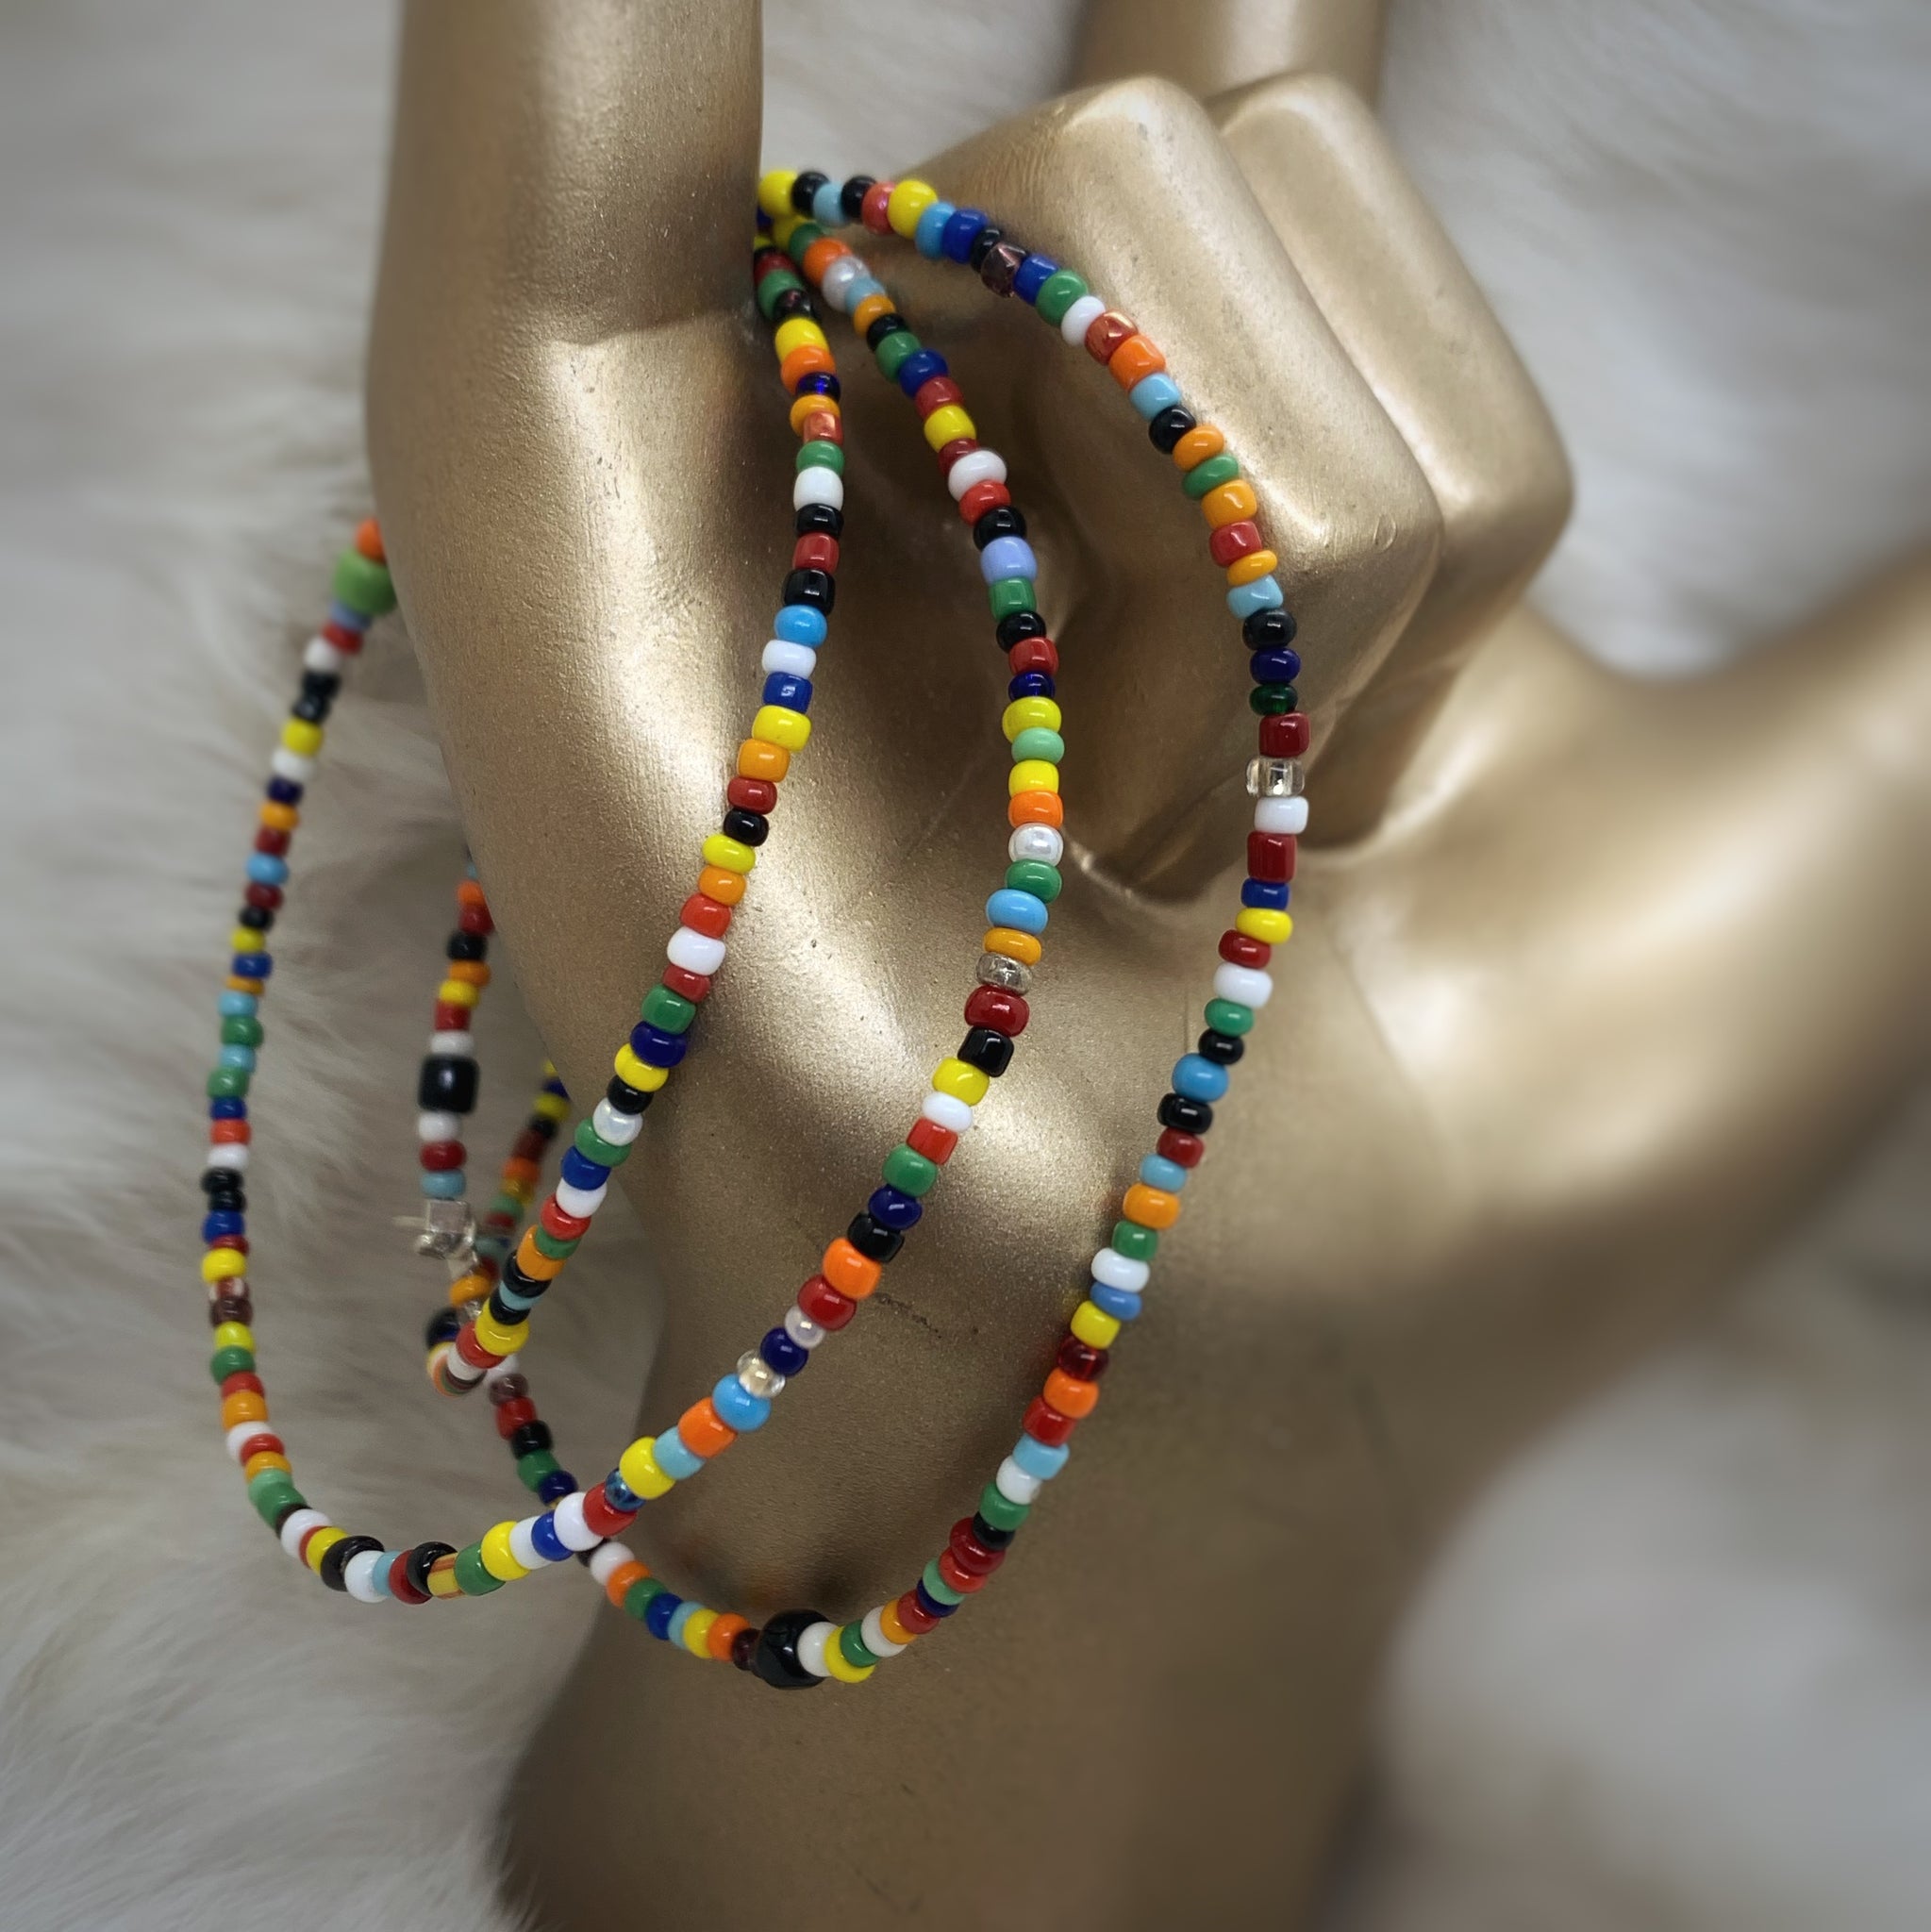 Hippies and Love Beads: History of Craft в журнале Ярмарки Мастеров